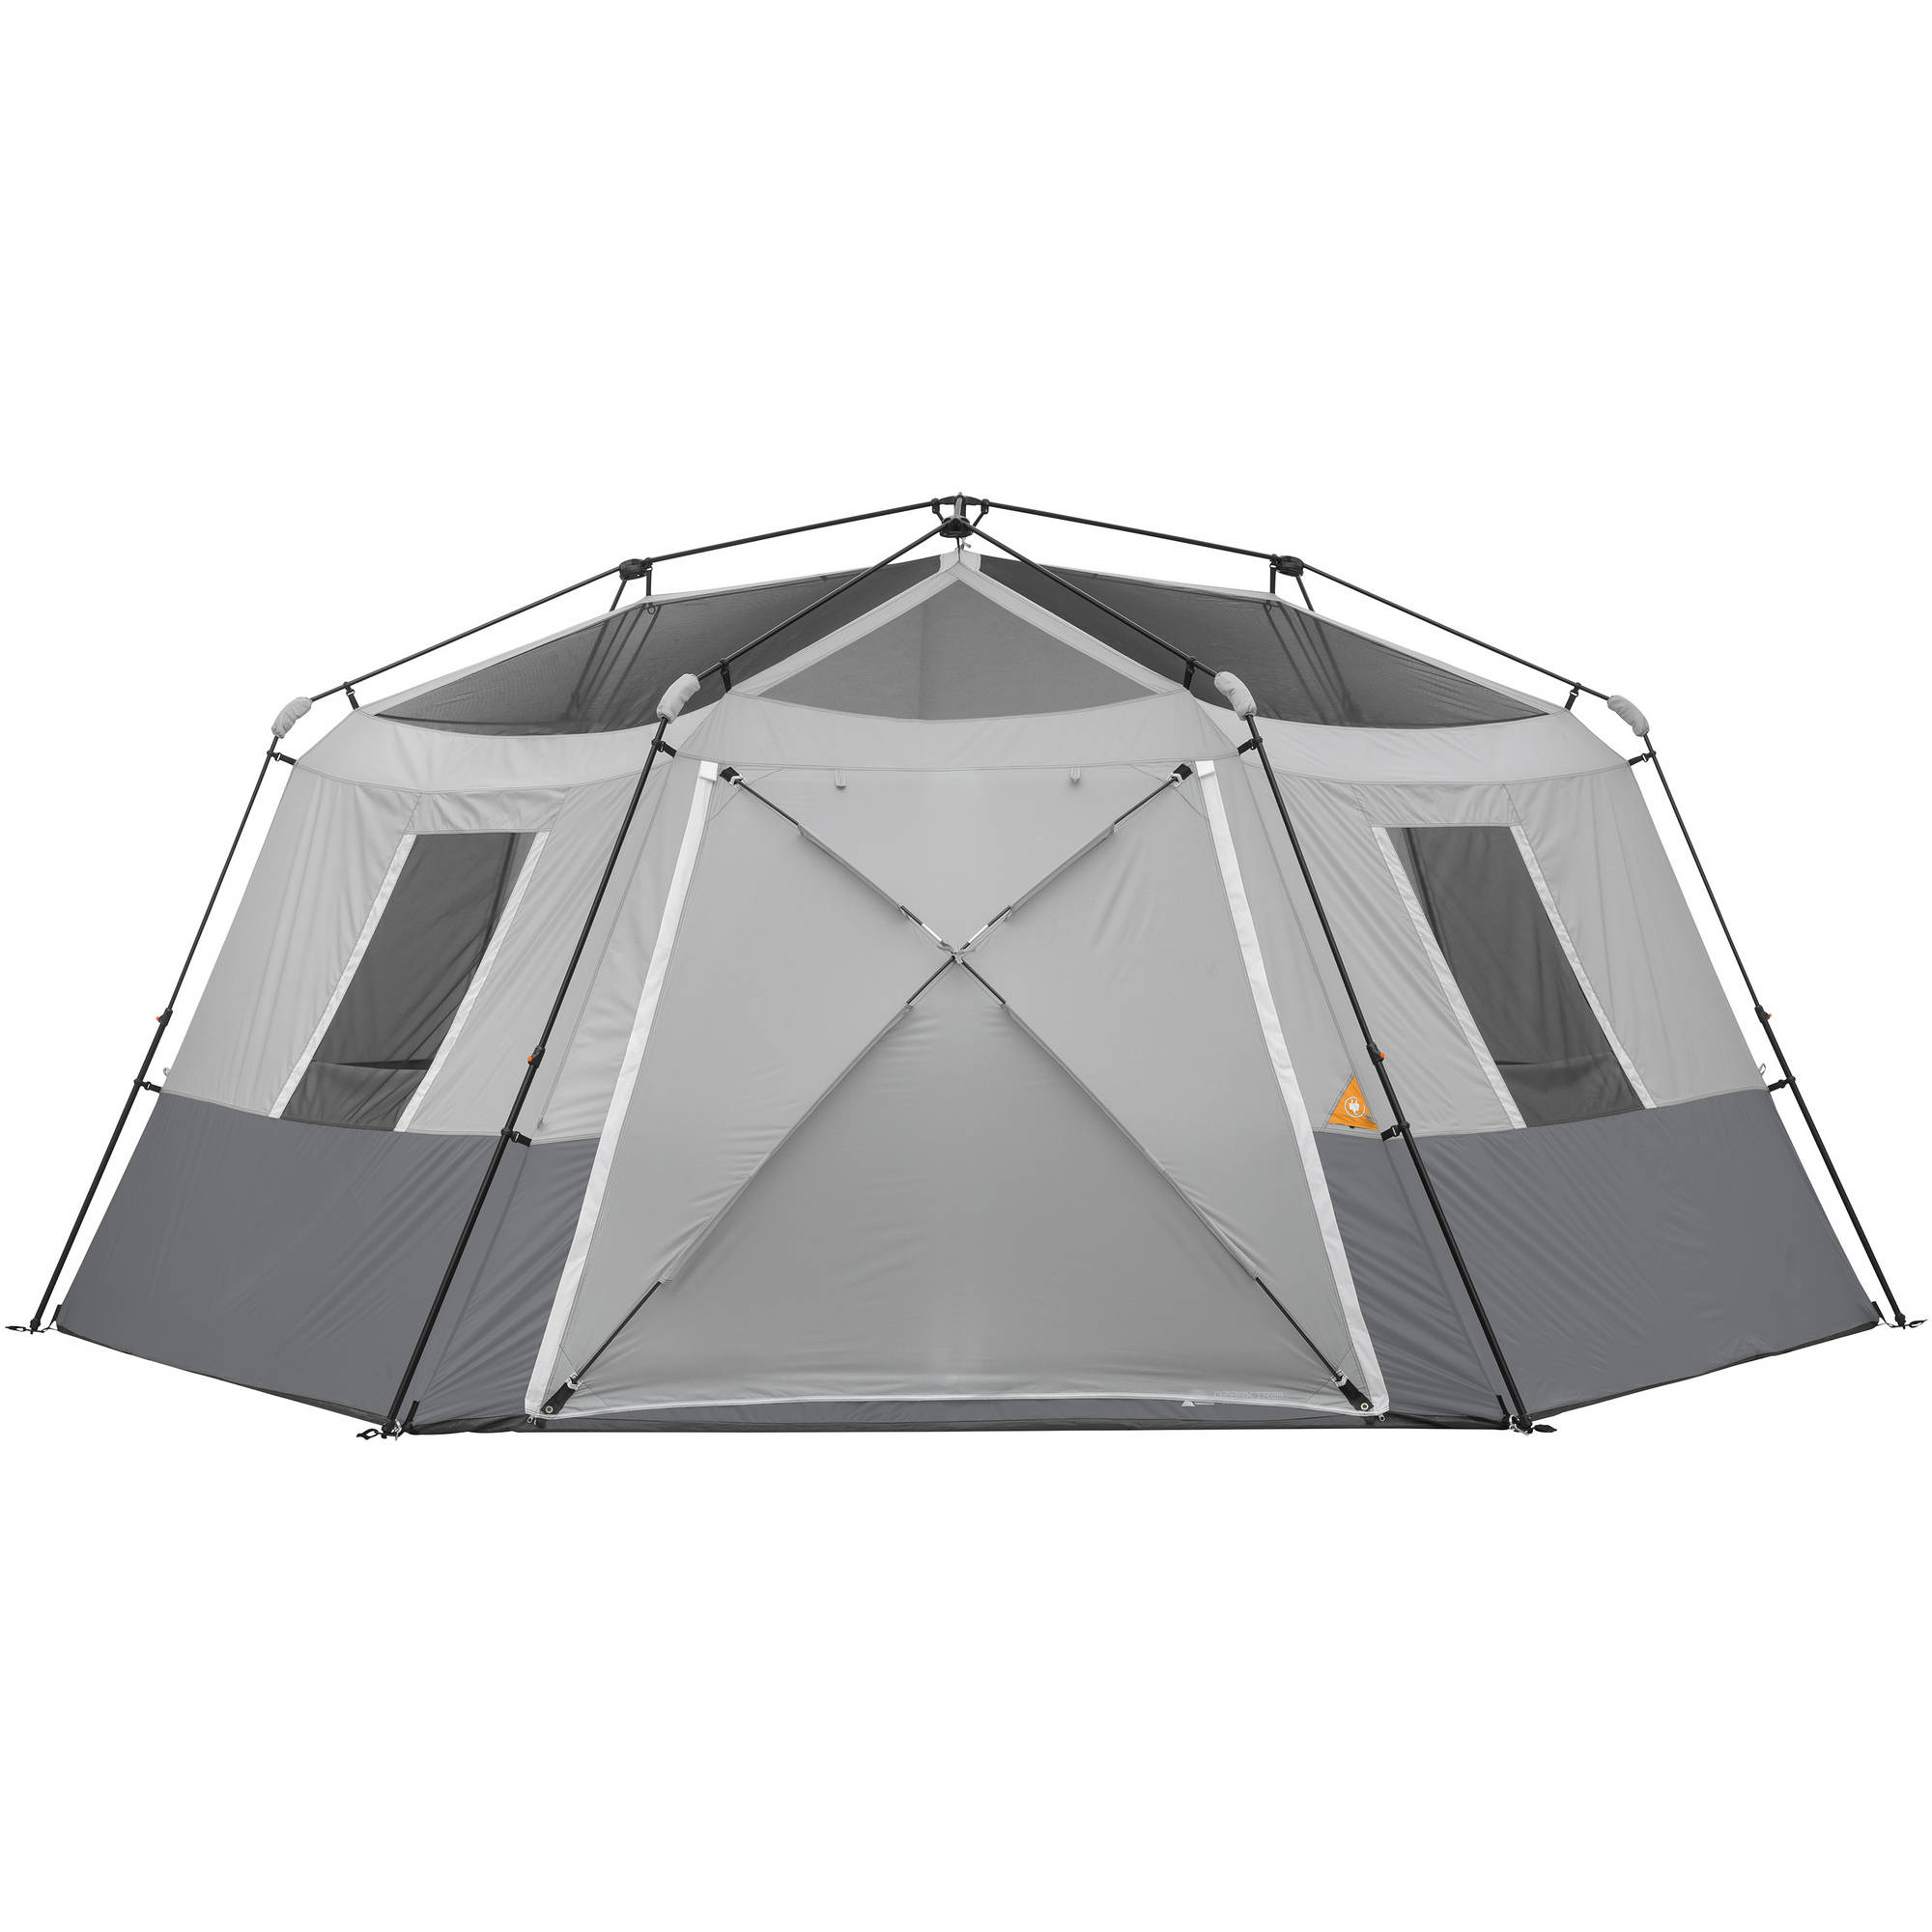 Ozark Trail 17' x 15' Person Instant Hexagon Cabin Tent, Sleeps 11 - image 3 of 15